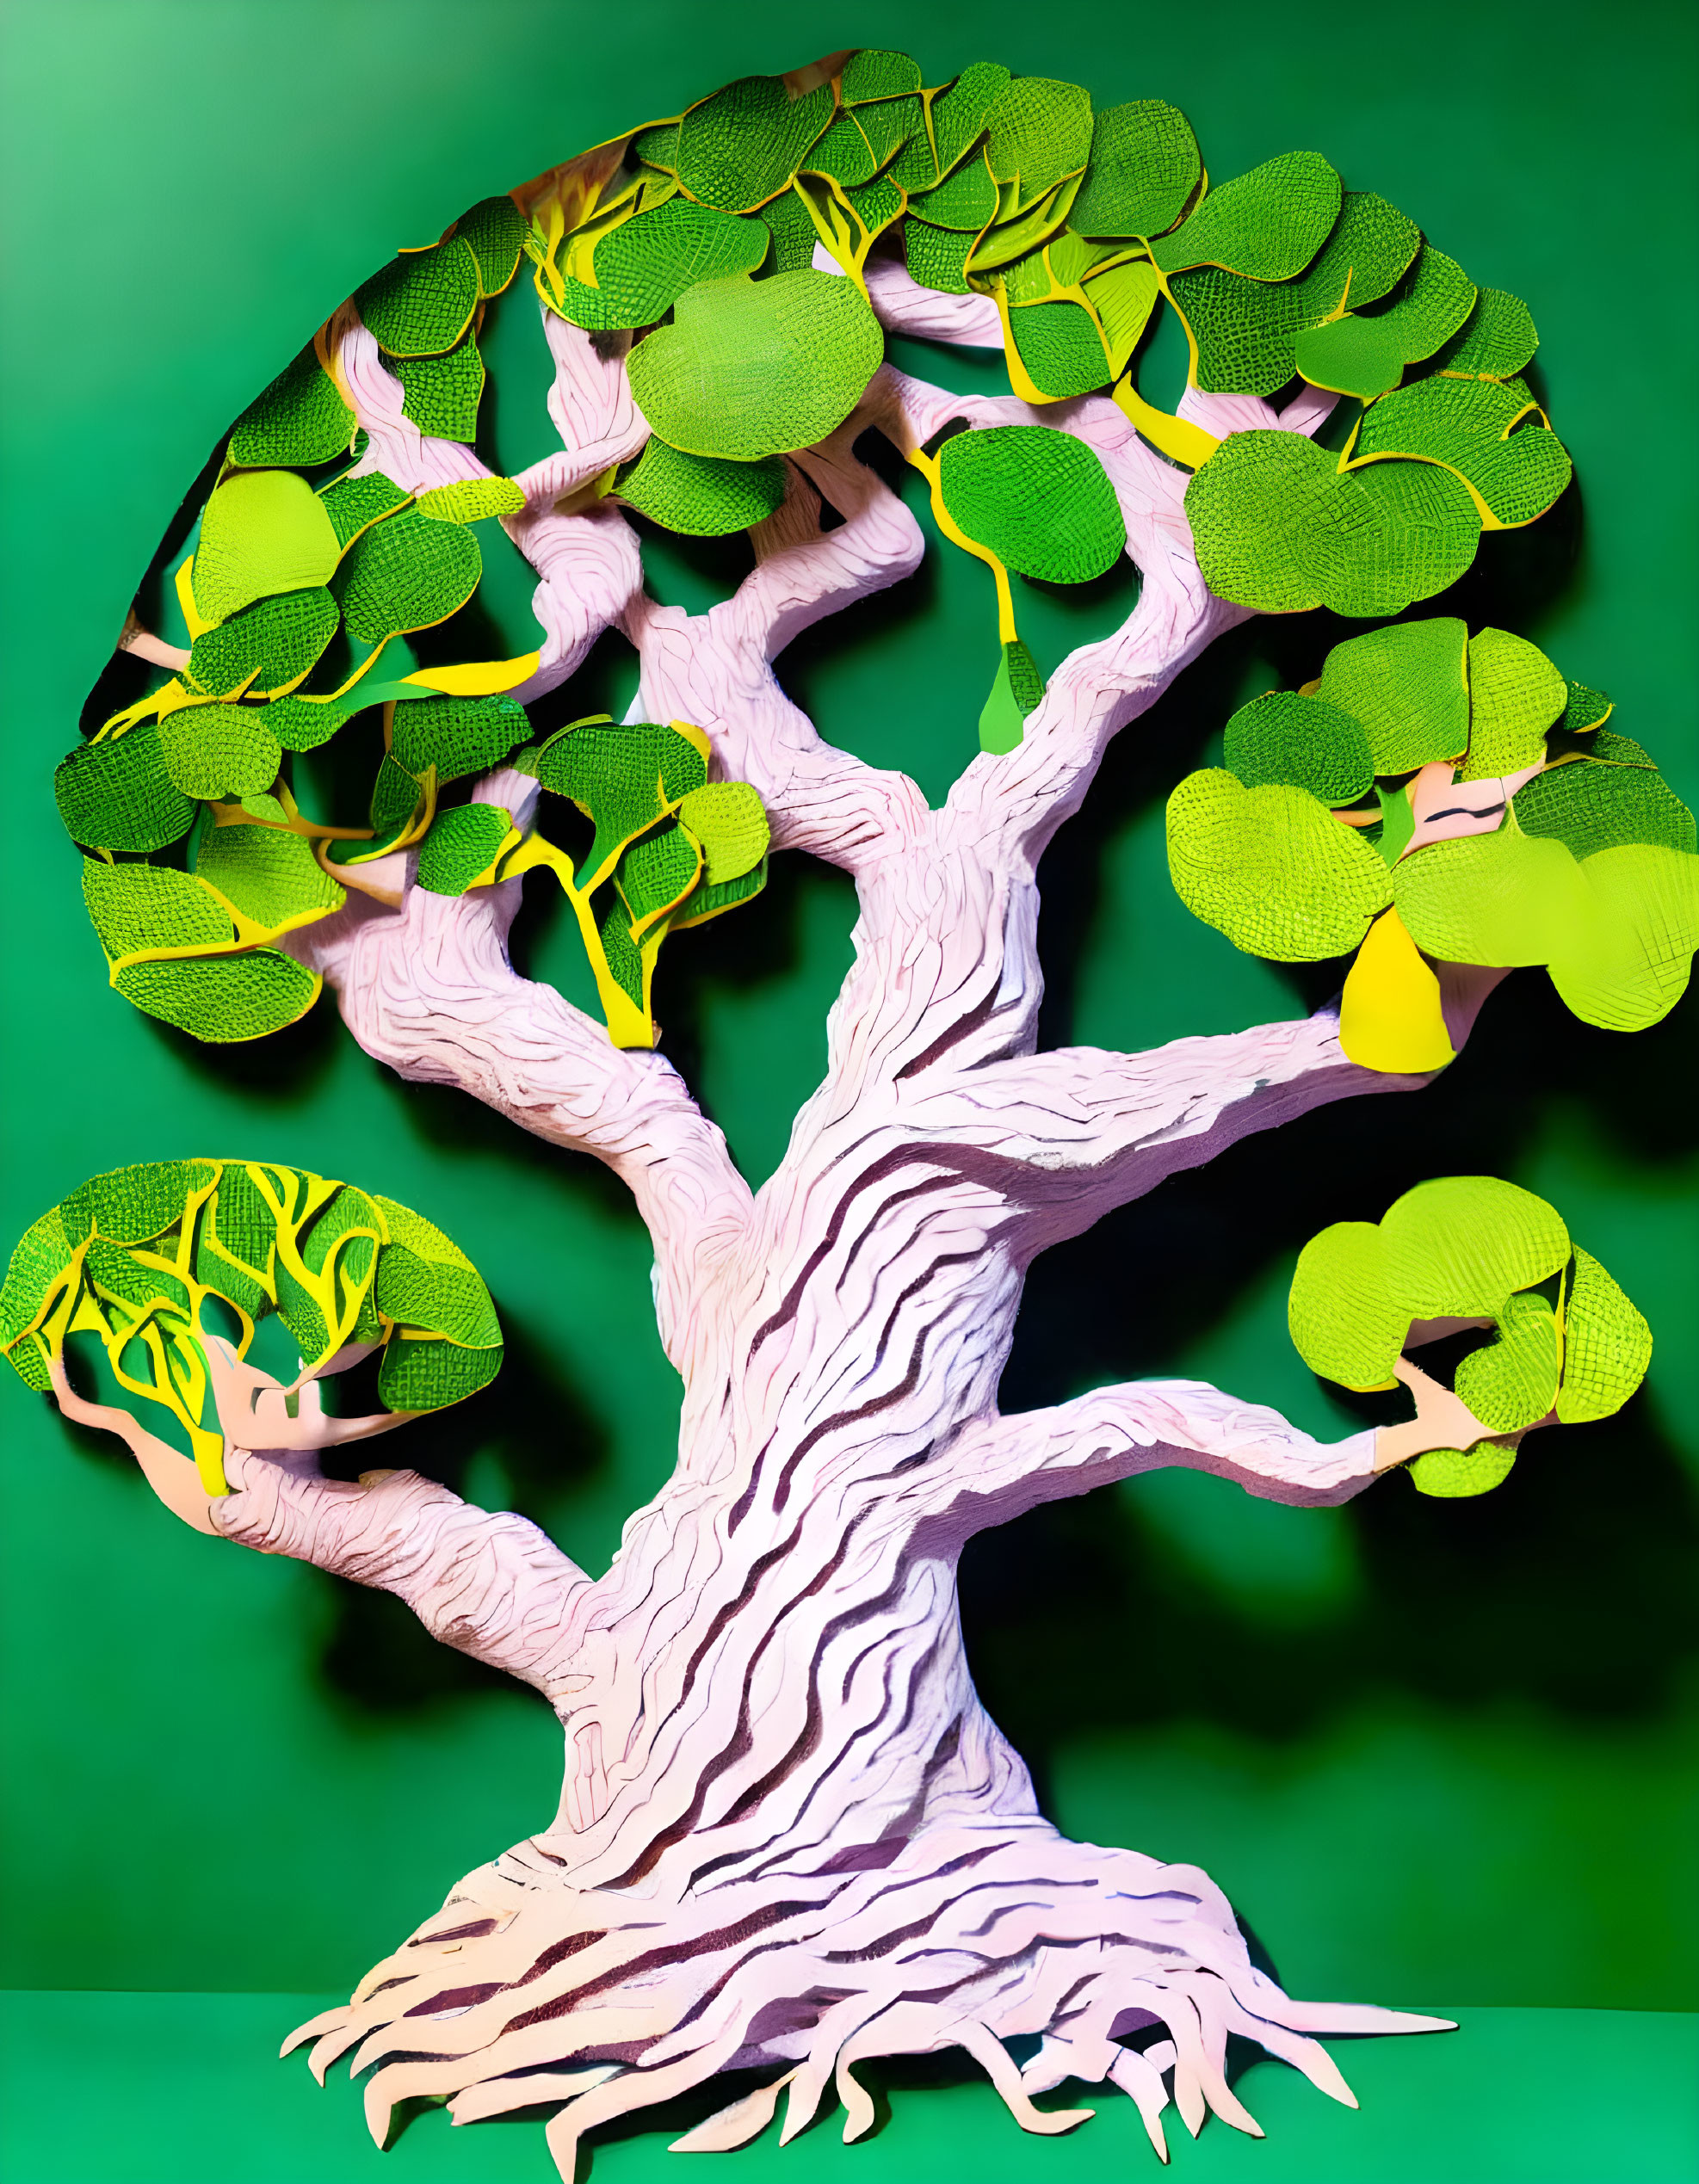 Paper art sculpture: Vibrant tree with white trunk and green leaf canopy